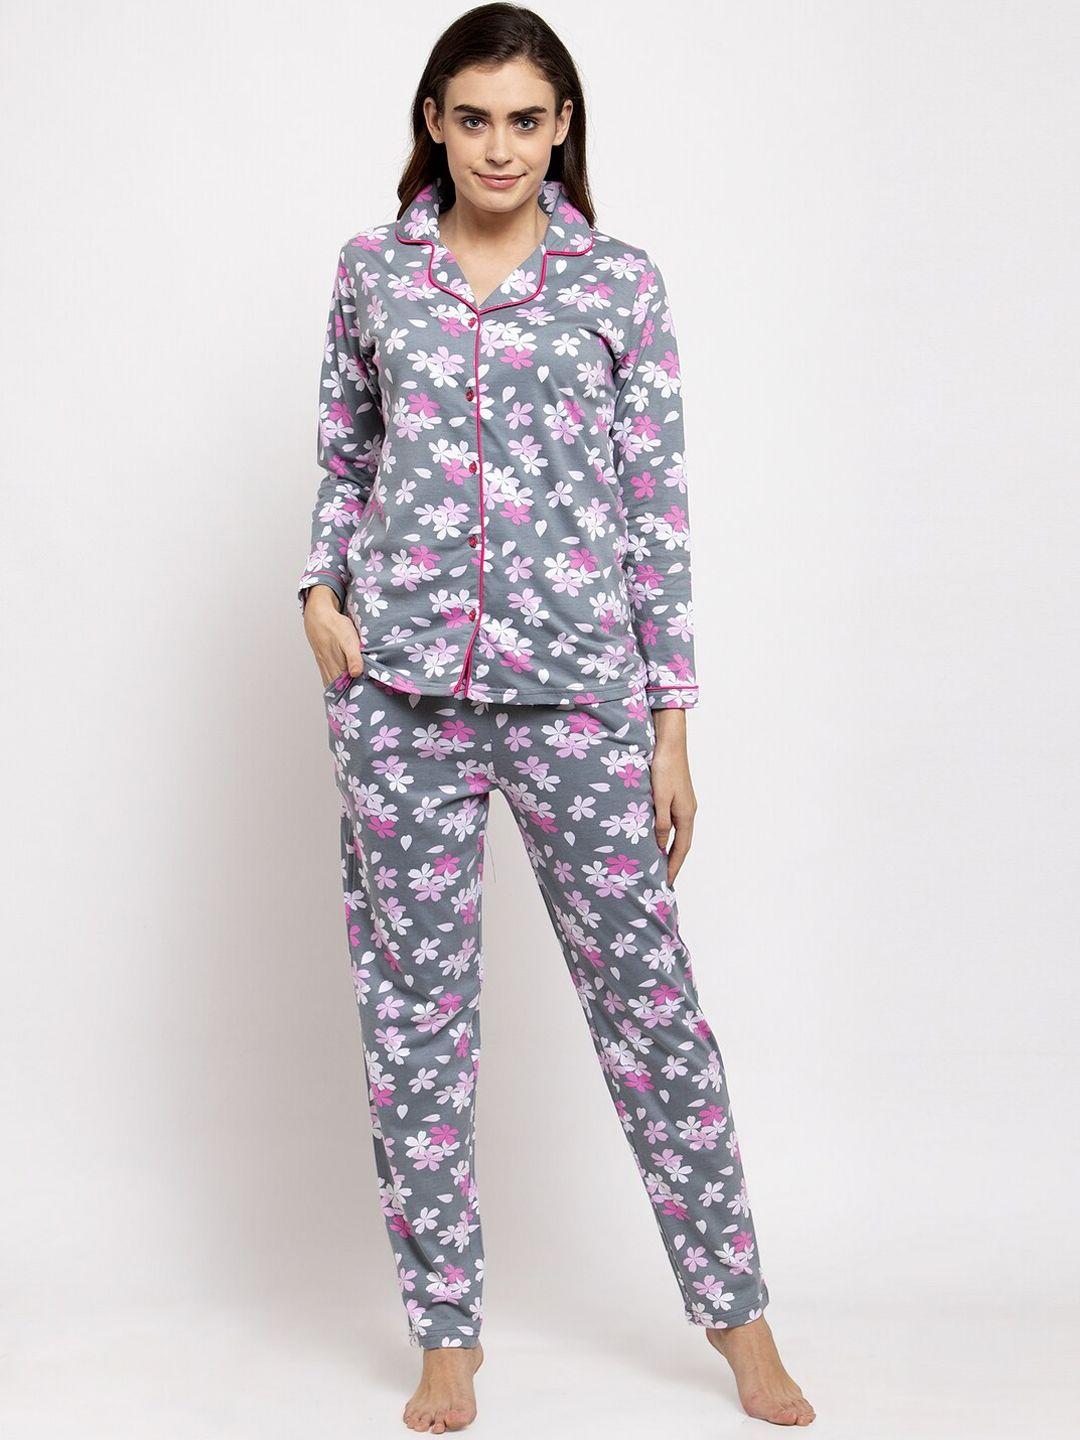 claura women grey & pink floral printed night suit